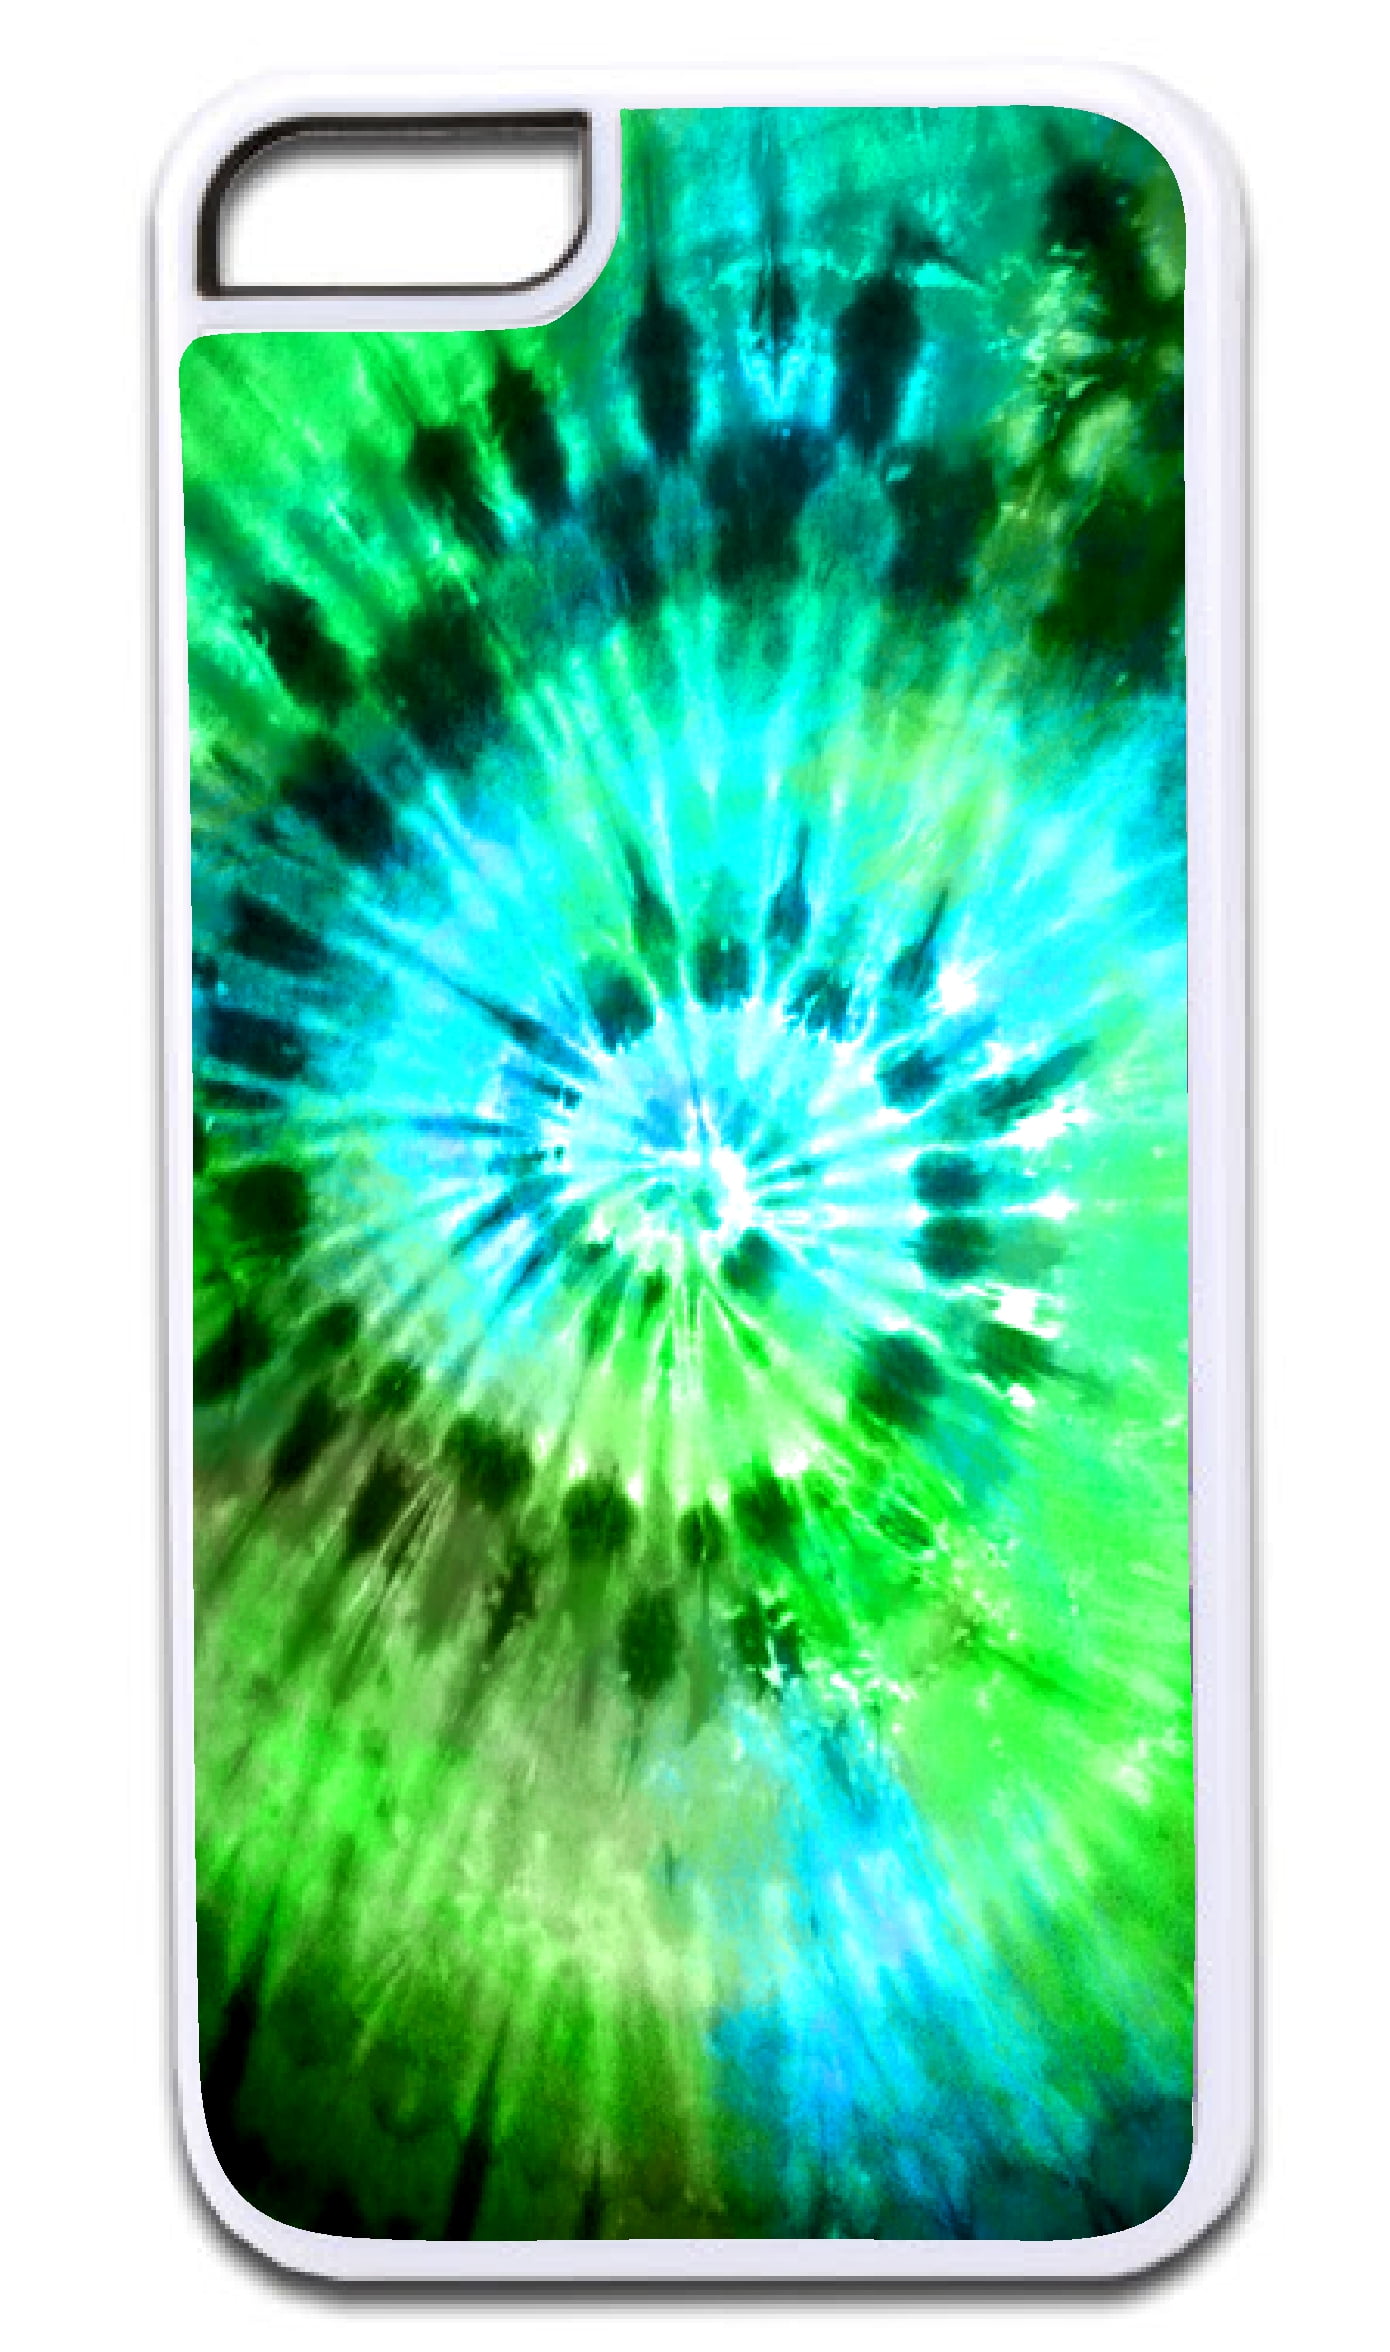 Blue and Green Tie Dye Design White Rubber Case for the Apple iPhone 6 Plus / iPhone 6s Plus - Apple iPhone 6 Plus Accessories -iPhone 6s Plus Accessories